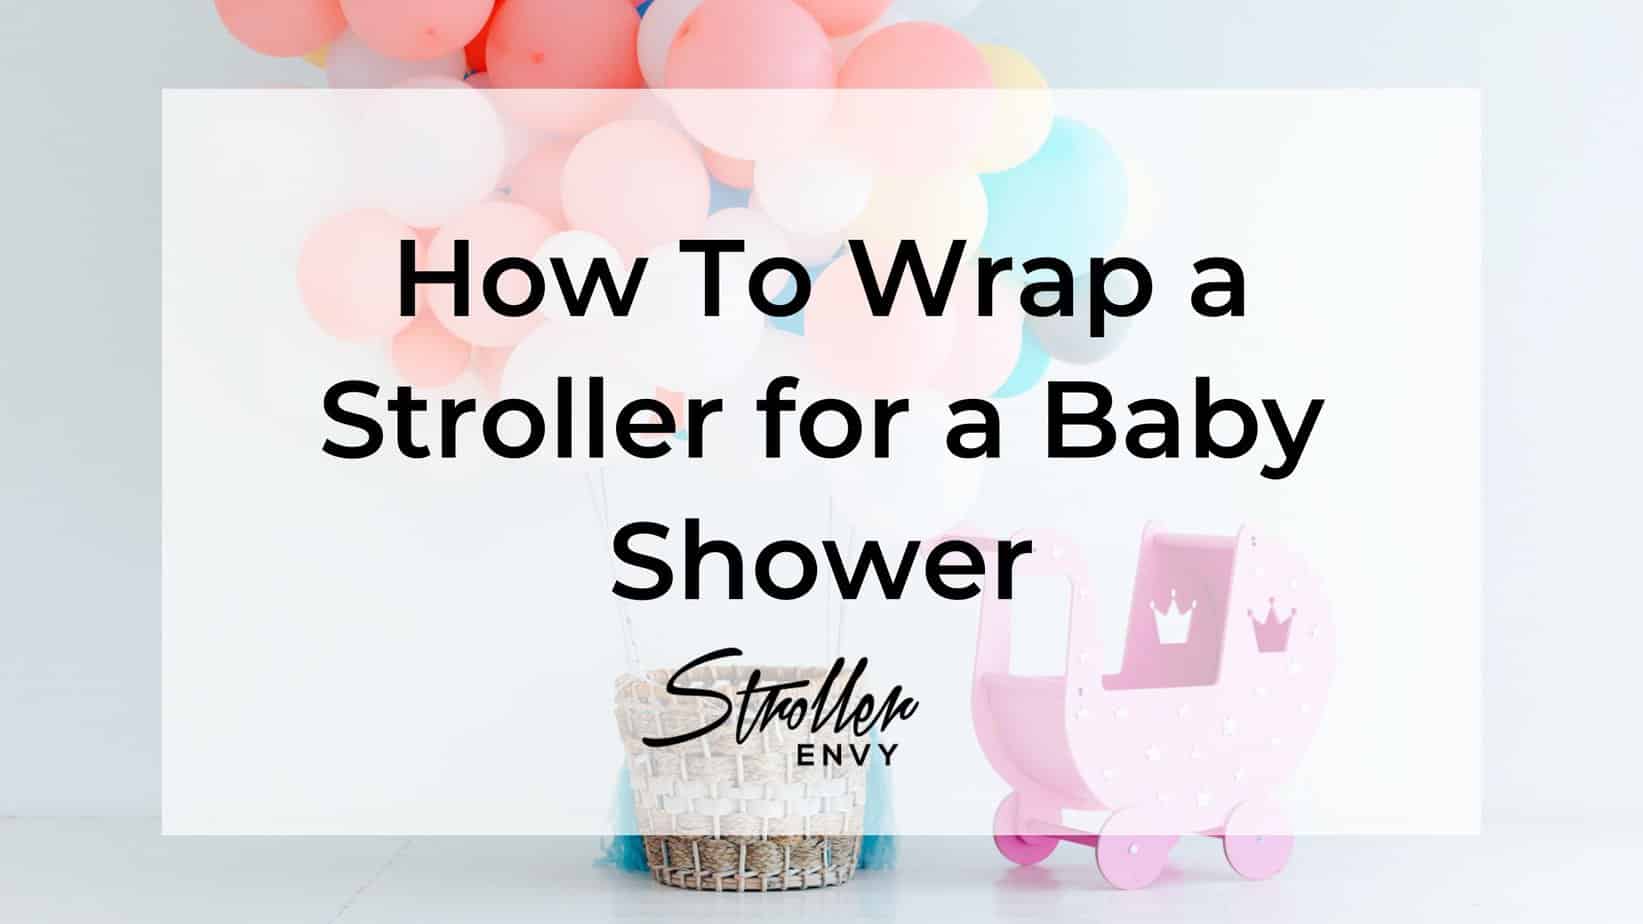 How To Wrap a Stroller for a Baby Shower